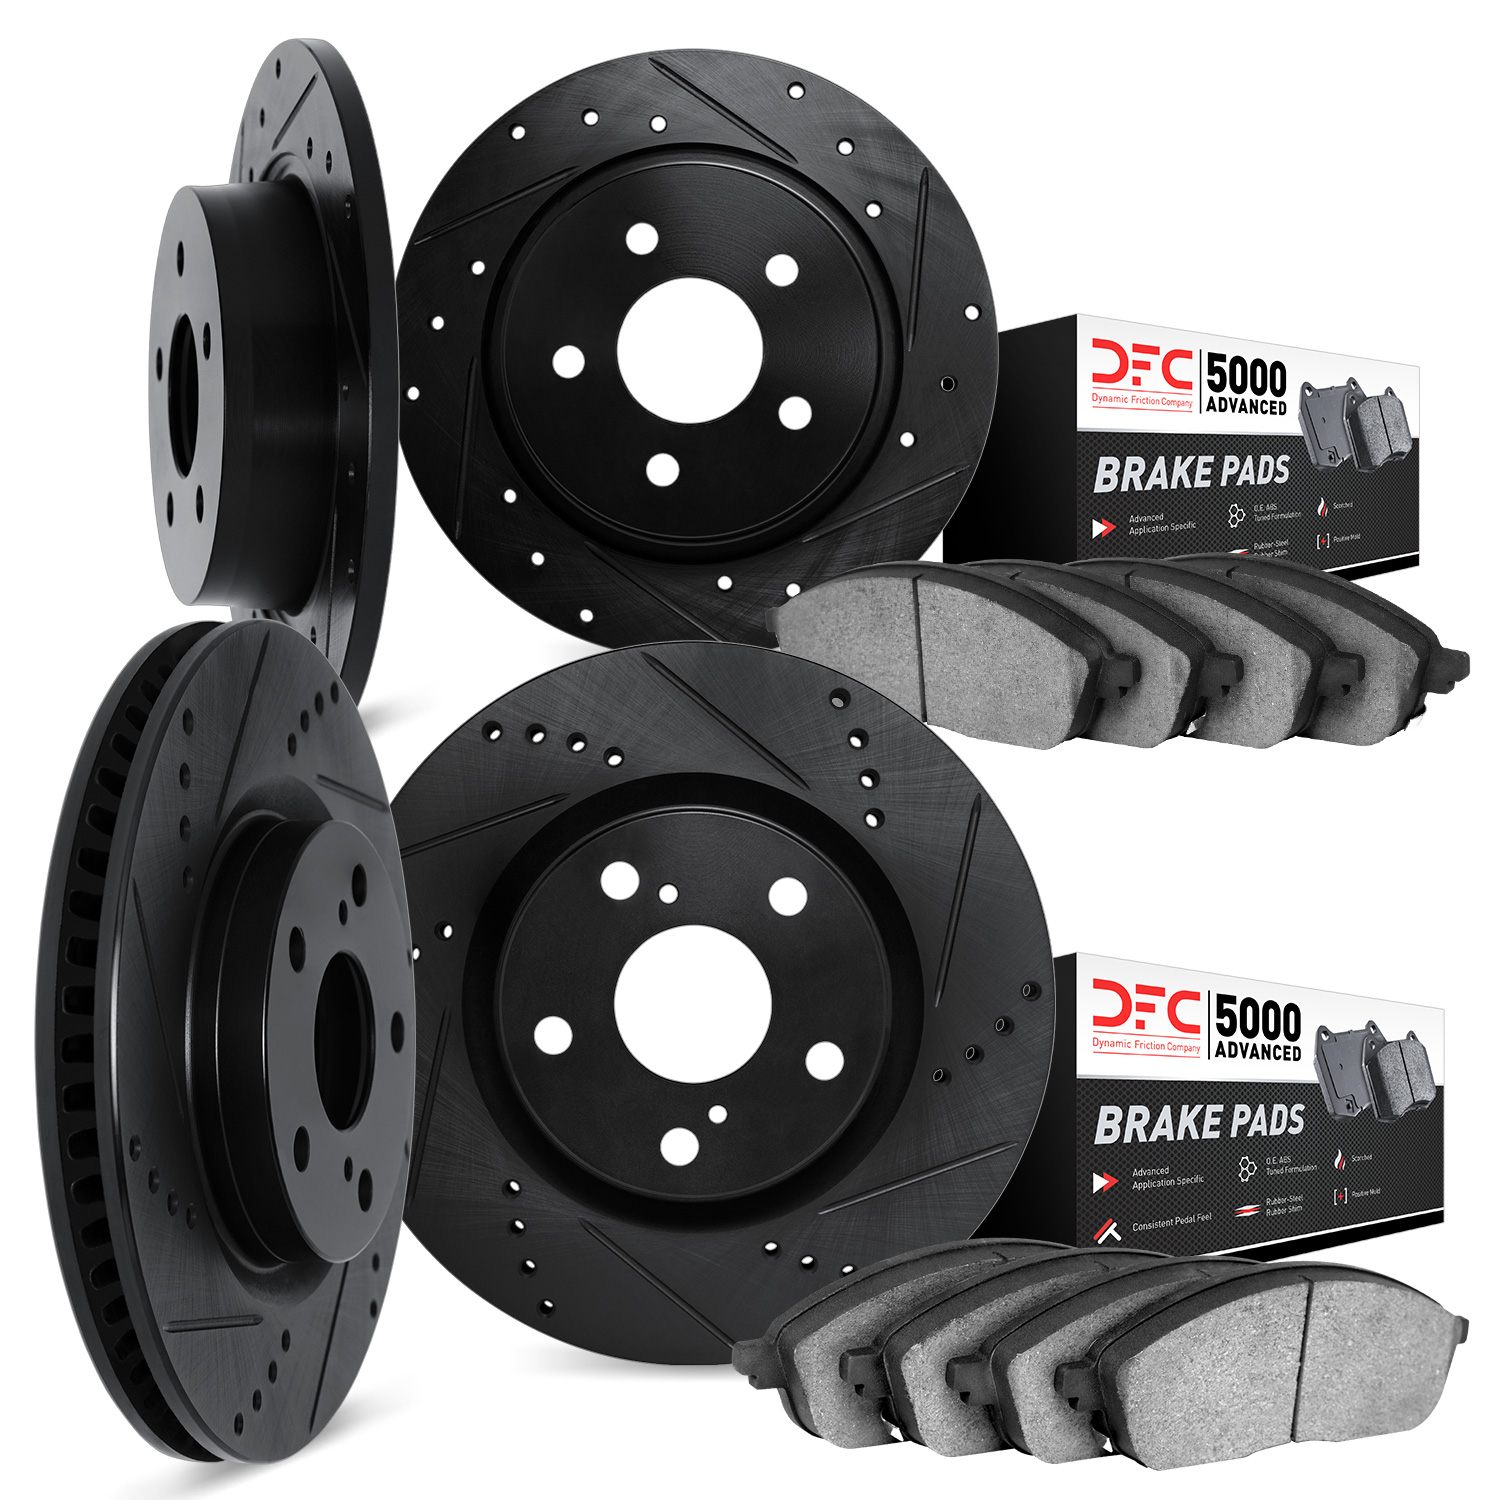 8504-52006 Drilled/Slotted Brake Rotors w/5000 Advanced Brake Pads Kit [Black], 2005-2005 GM, Position: Front and Rear